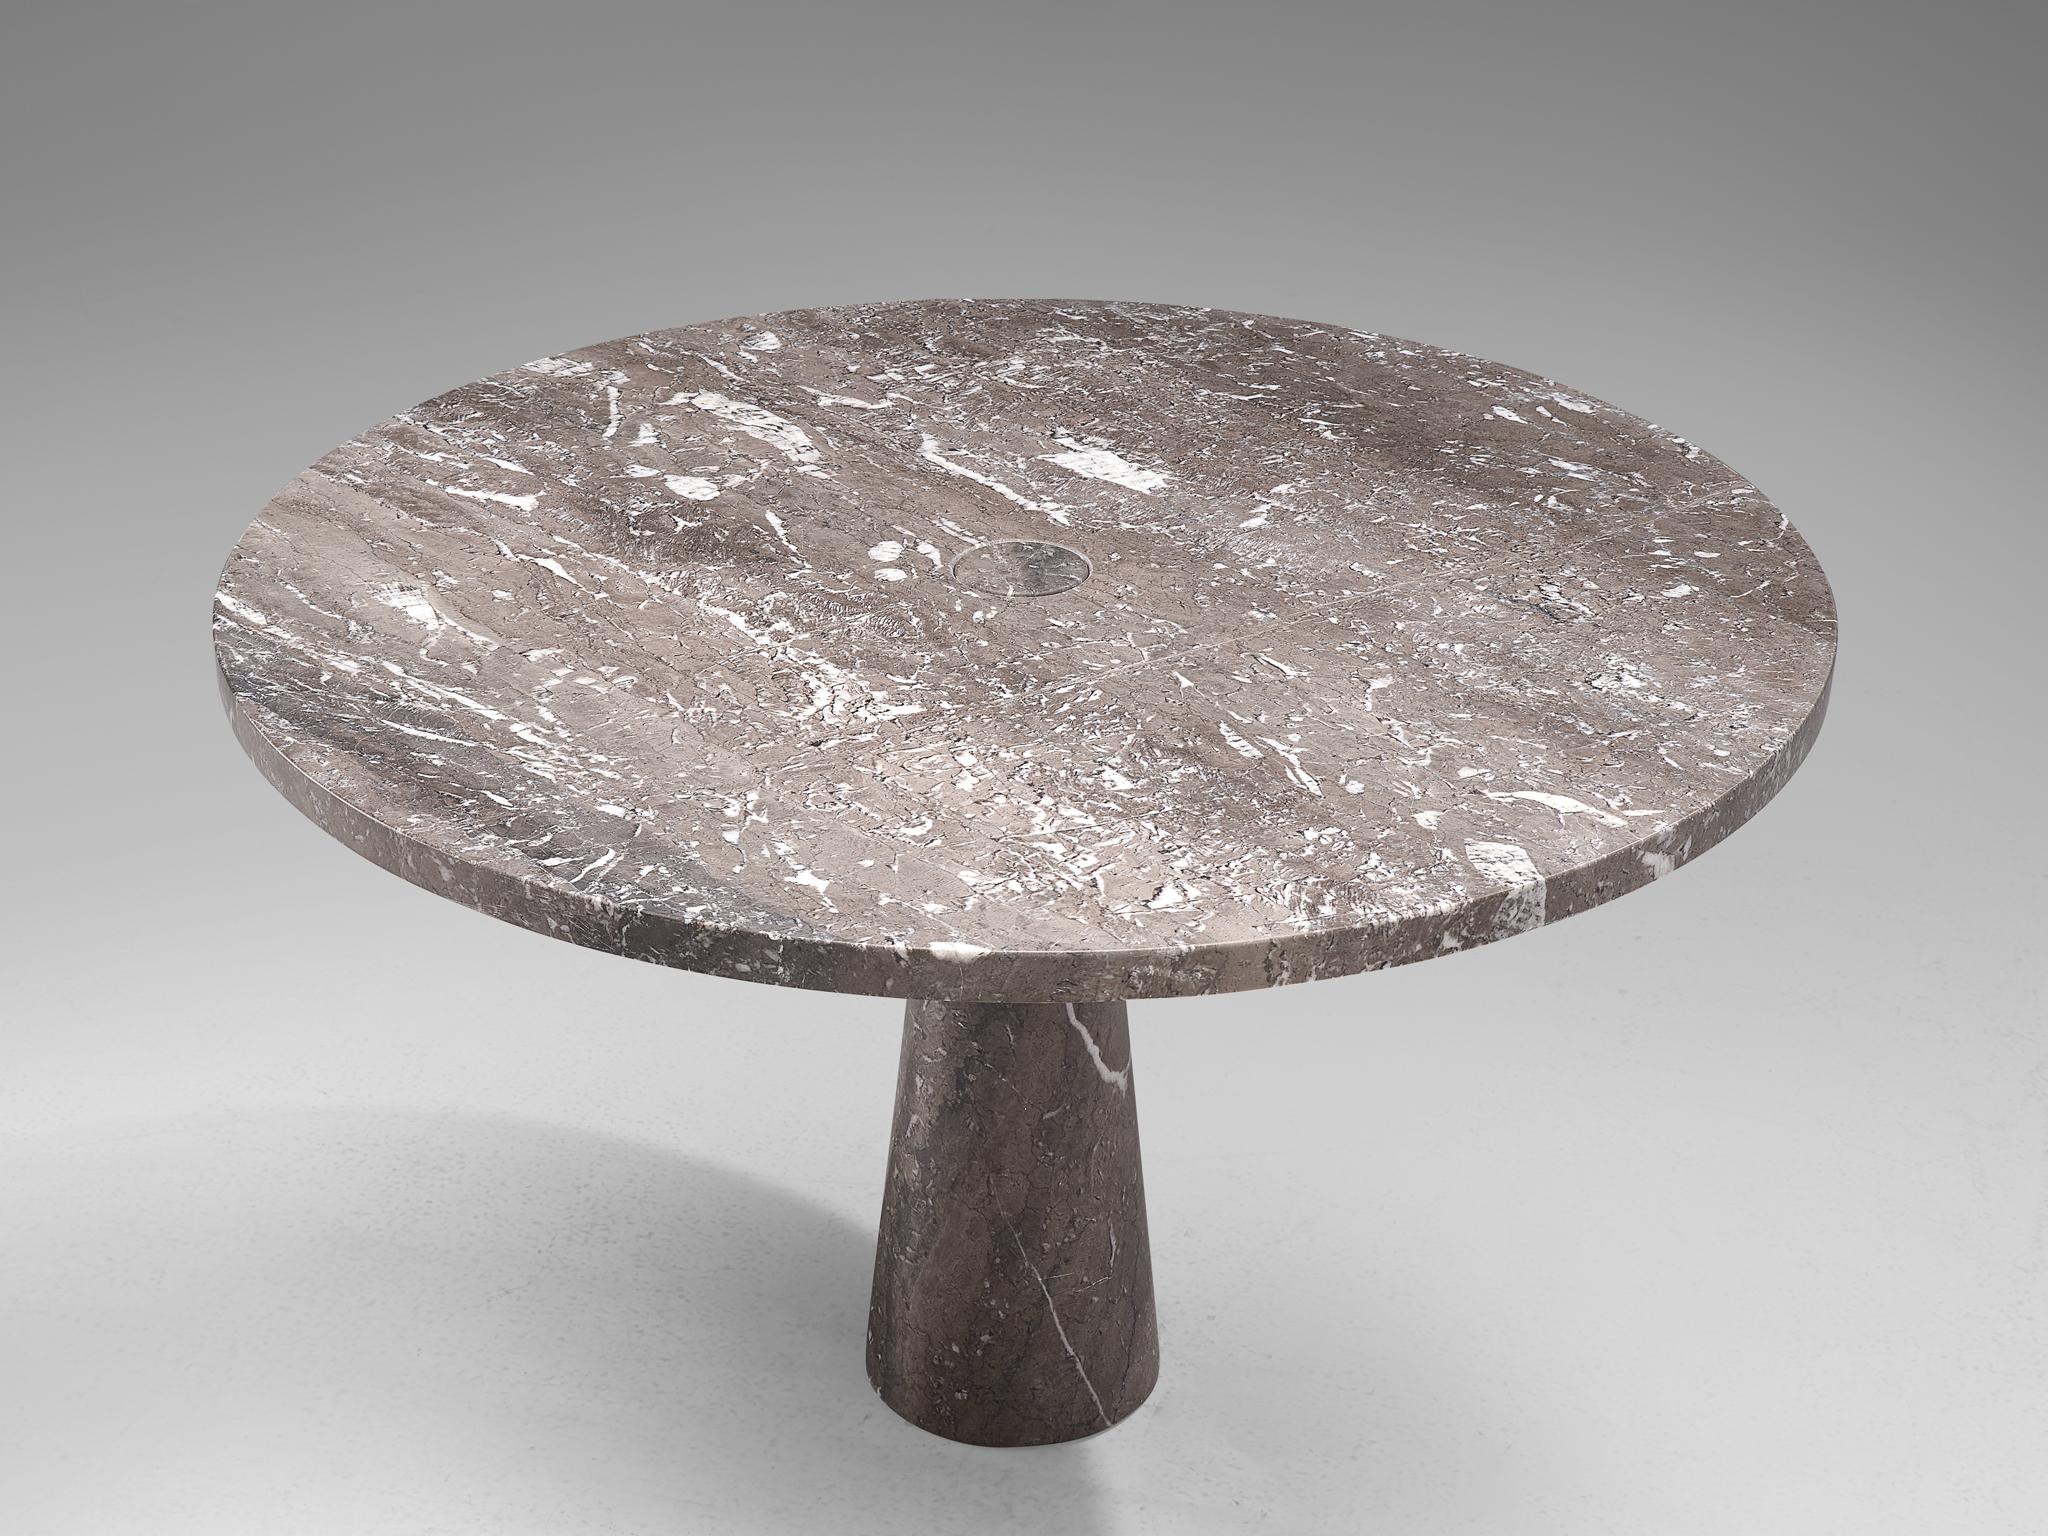 Angelo Mangiarotti, dining table, marble, 1970s.

This sculptural table by Angelo Mangiarotti is a skilful example of postmodern design. The table is executed in grey marble featuring delicate white veins. The soft edged circular table features no